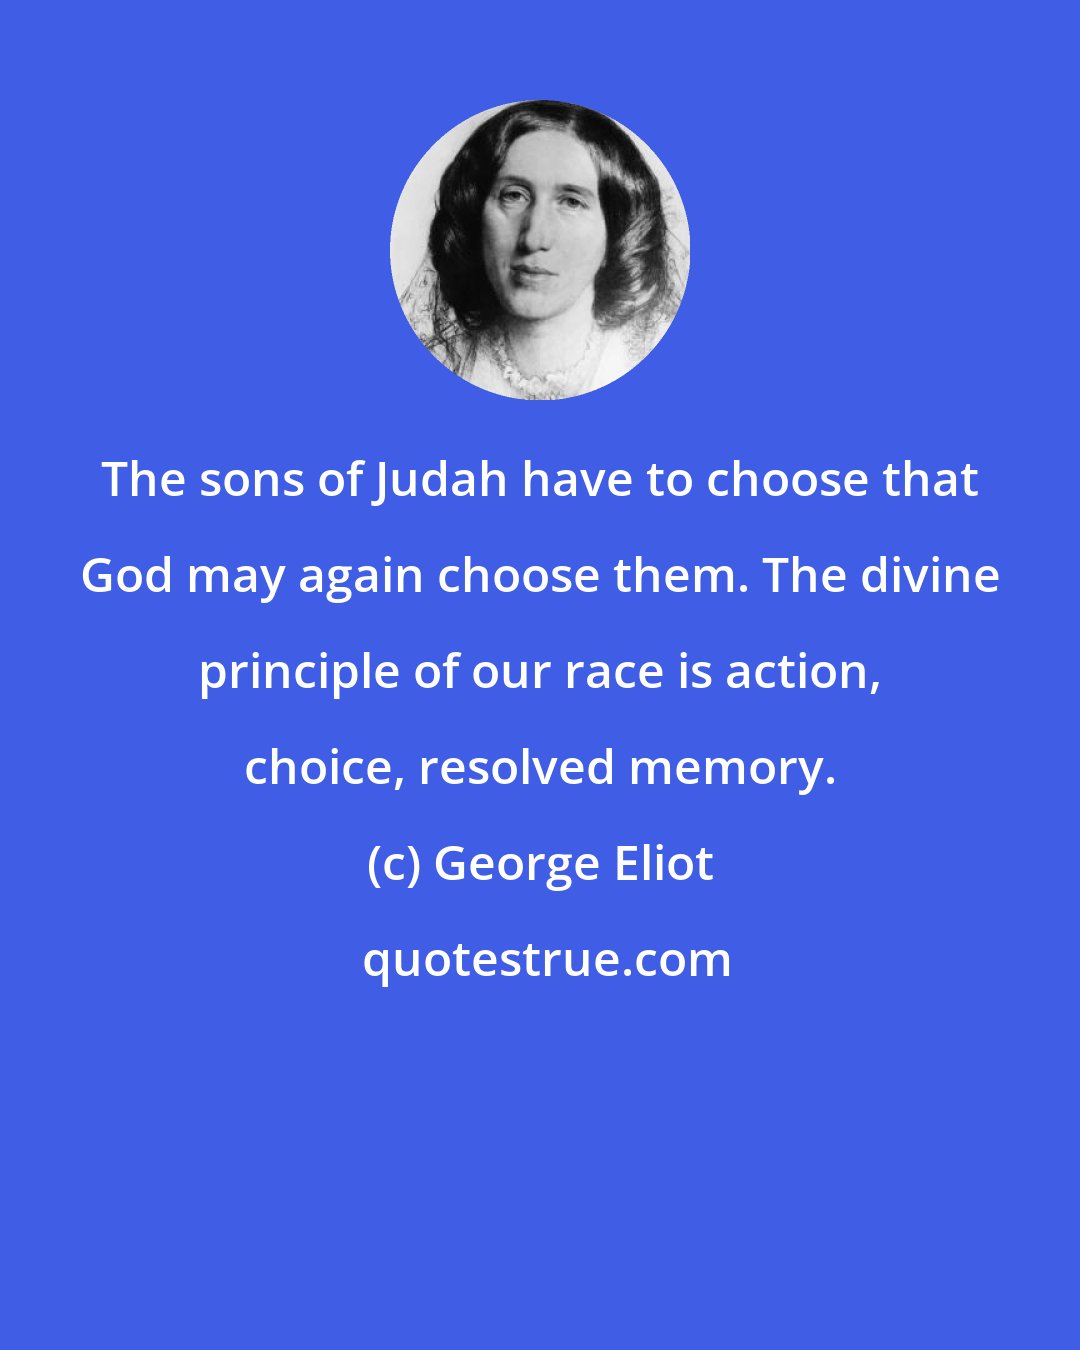 George Eliot: The sons of Judah have to choose that God may again choose them. The divine principle of our race is action, choice, resolved memory.